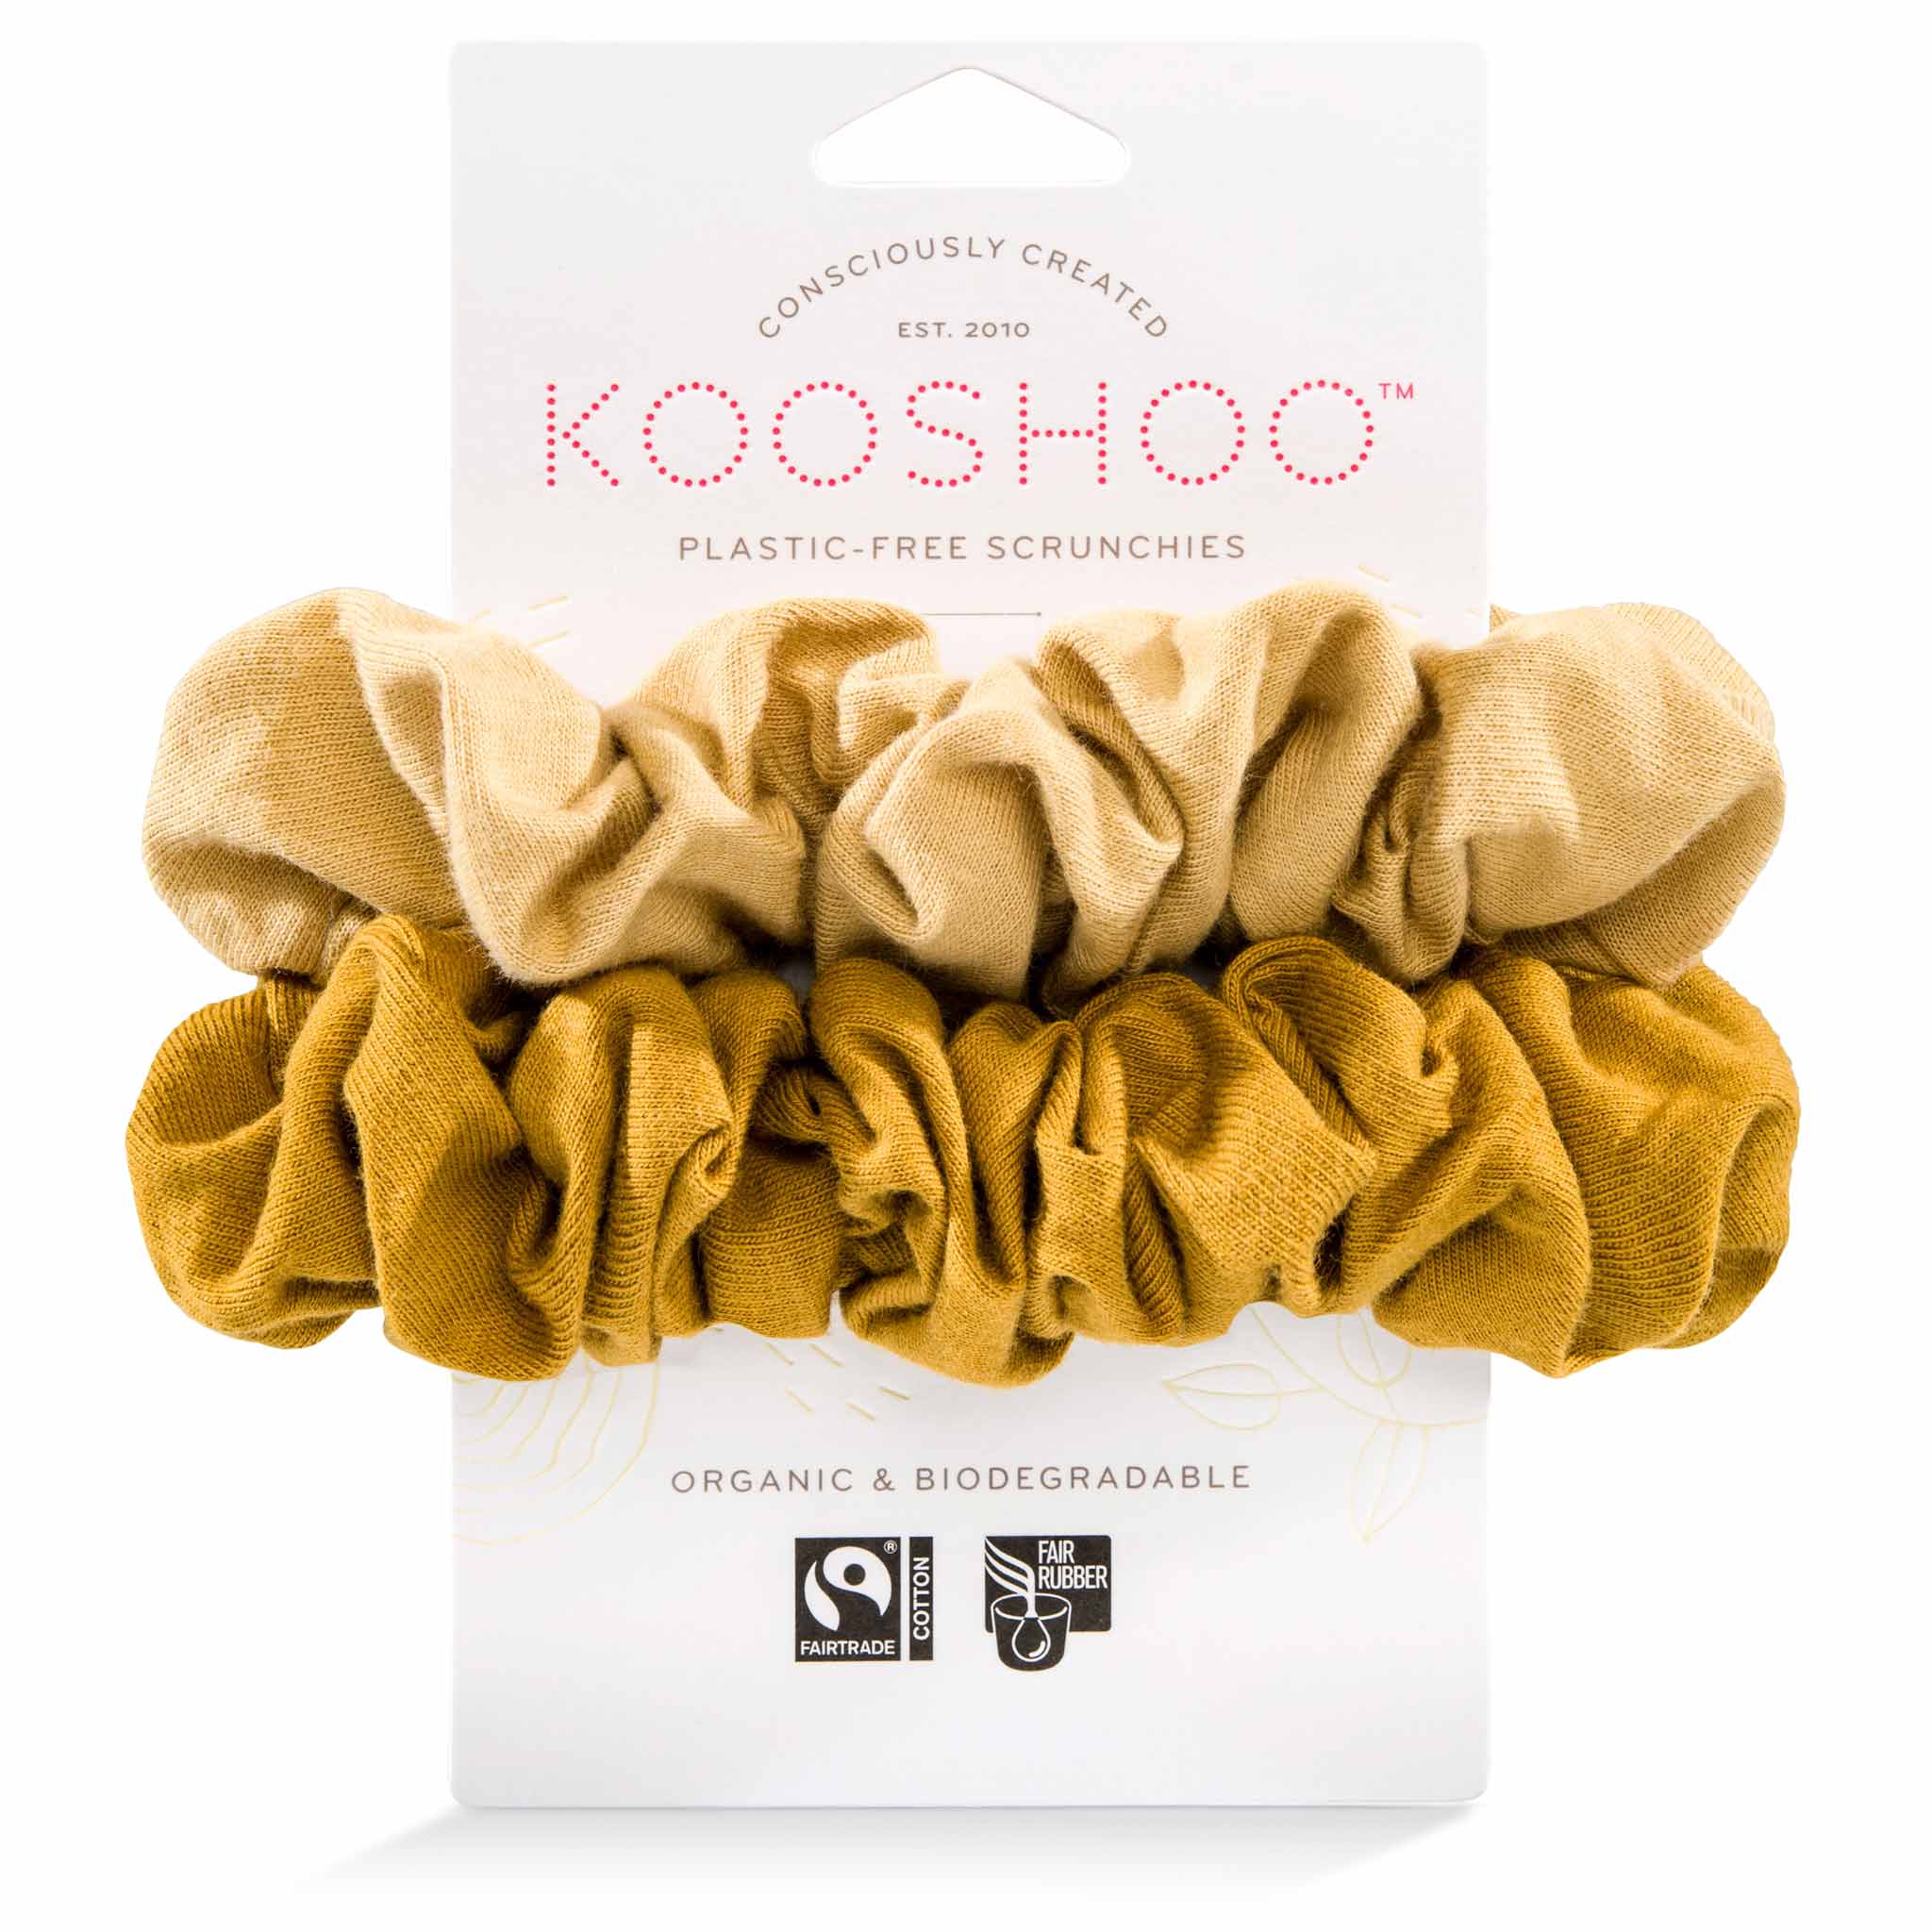 Plastic-Free Scrunchies of Organic Cotton for Soft, Ouchless –